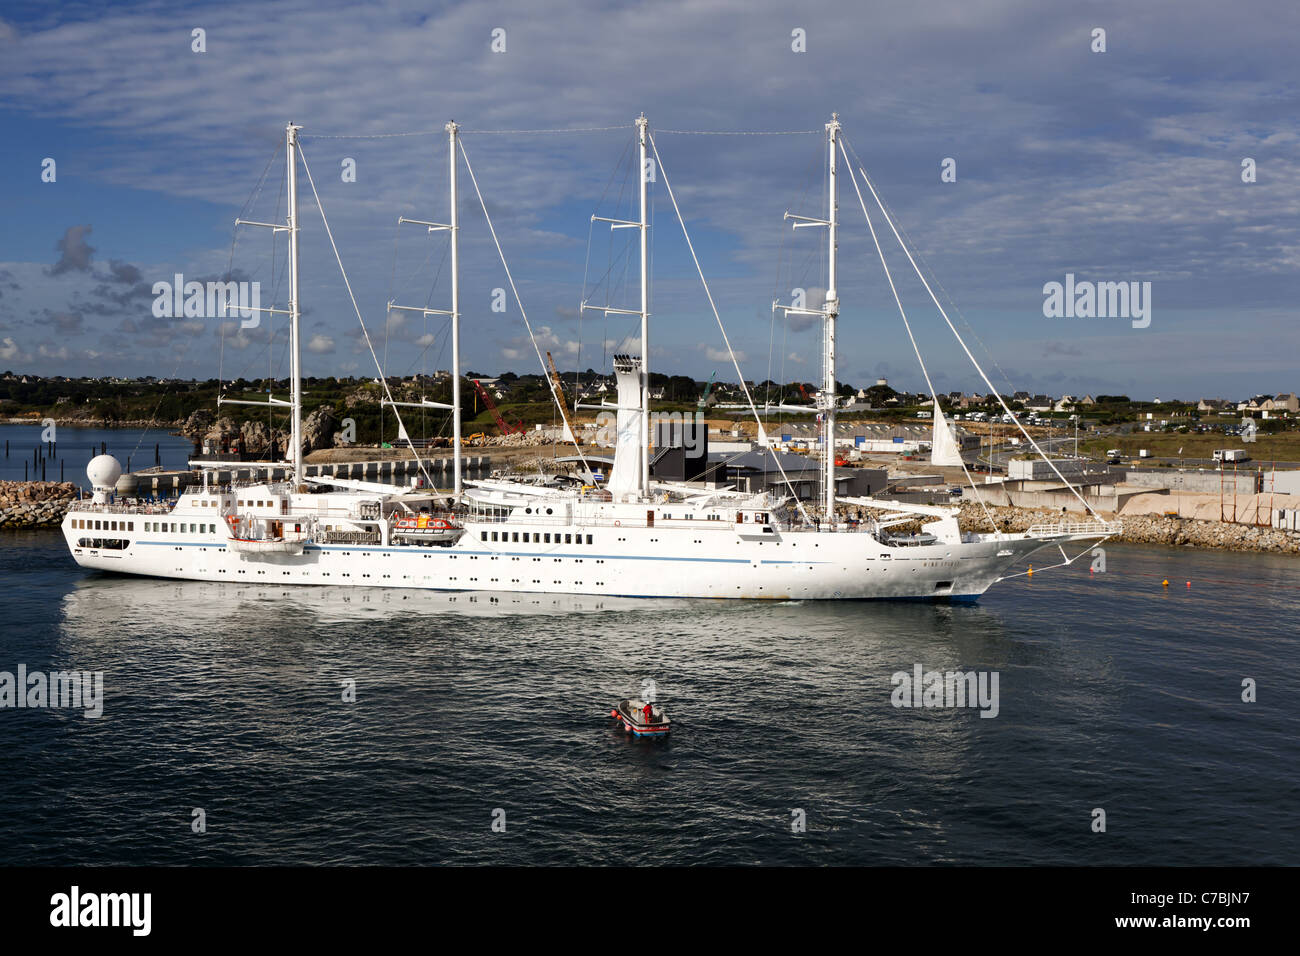 Wind Spirit, a four-masted schooner of the Windstar Cruise Line, entering Roscoff Harbour, France Stock Photo